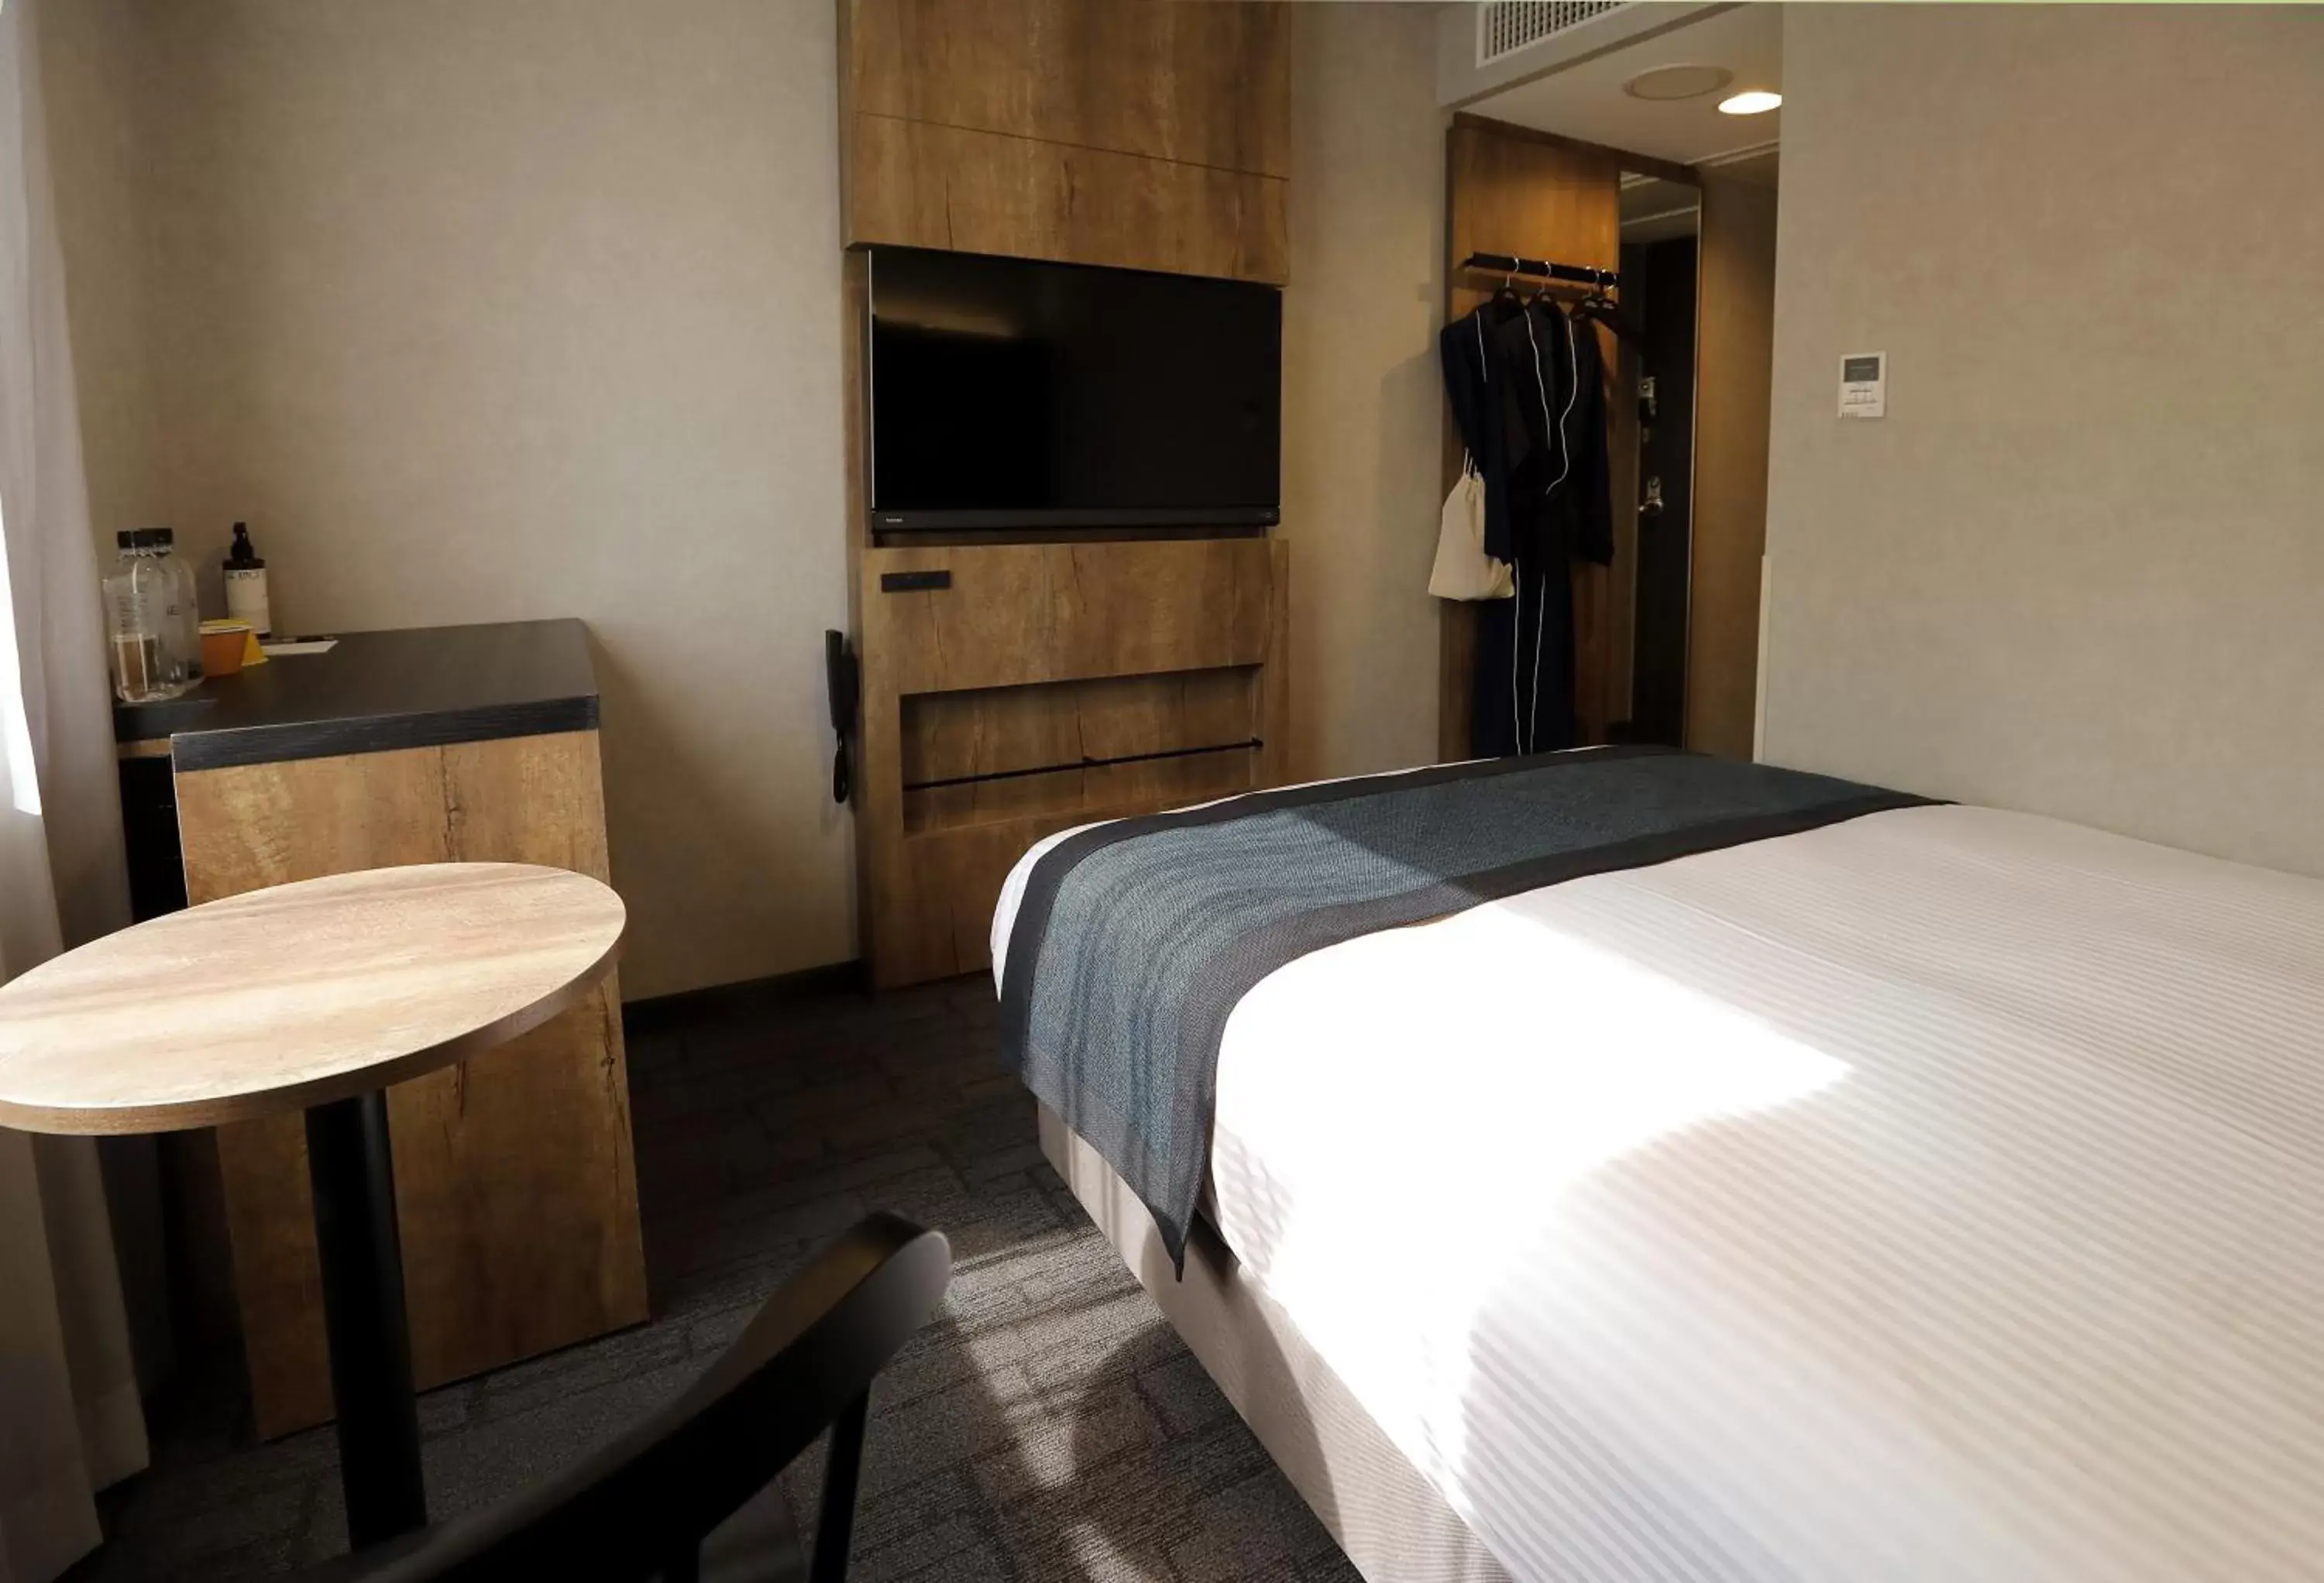 14㎡ Standard Single Room on the 1st. Floor - Non-Smoking in THE KNOT TOKYO Shinjuku